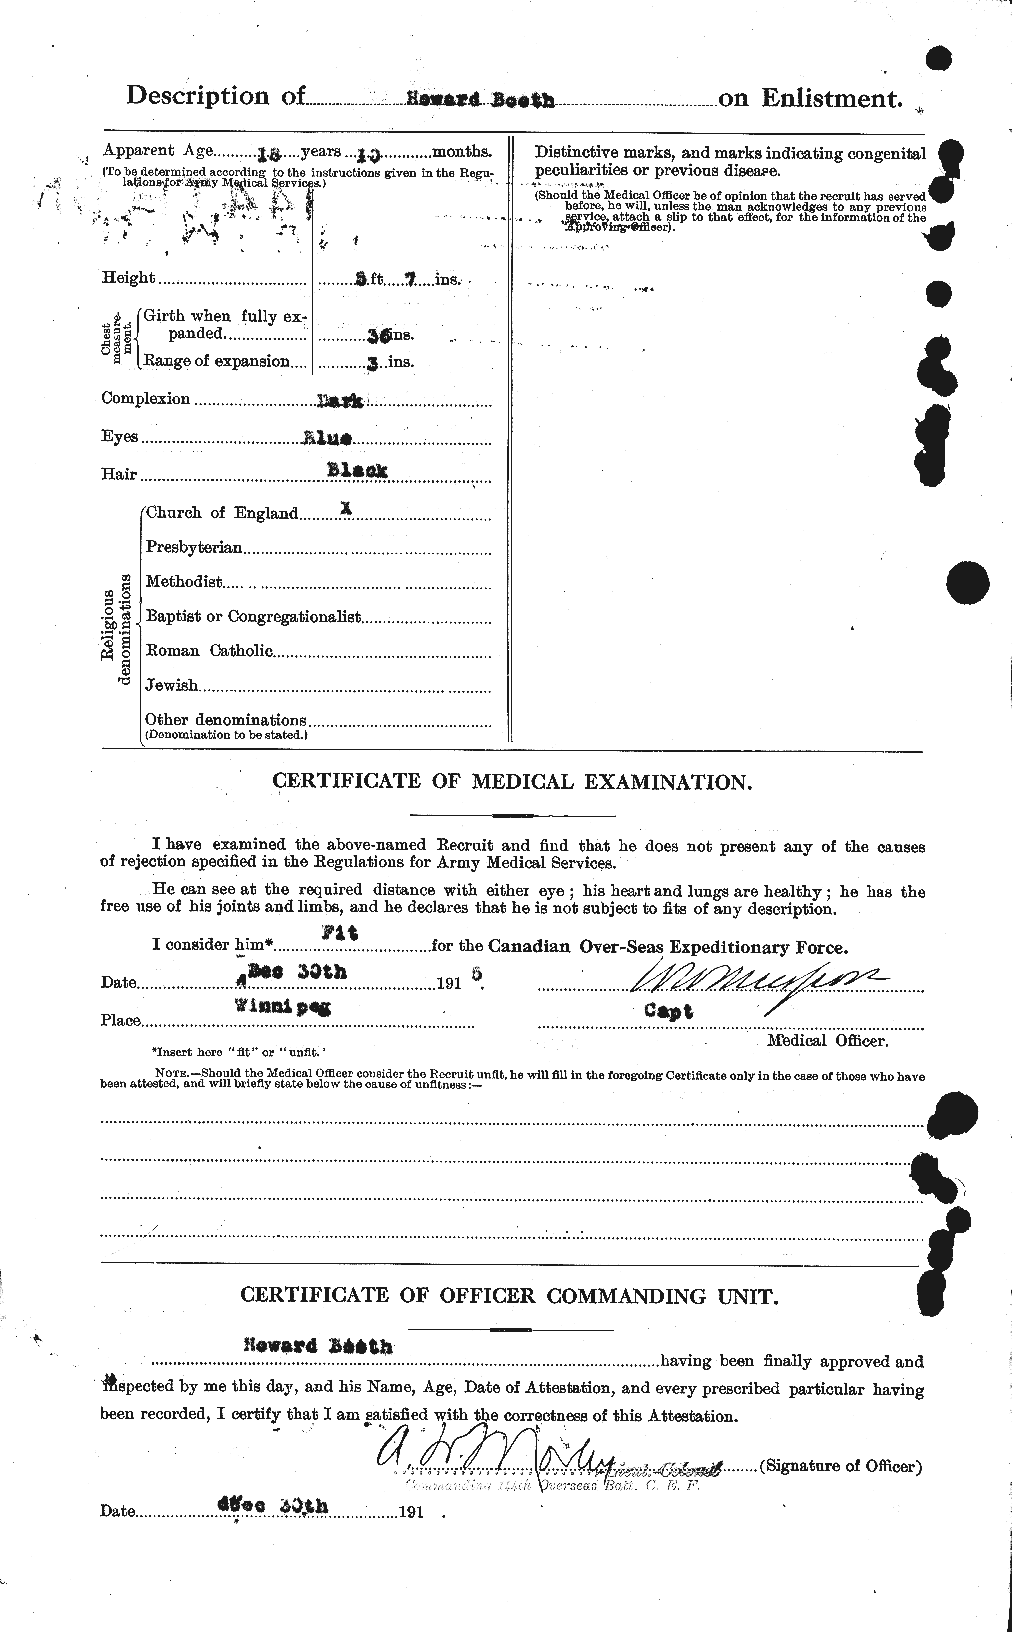 Personnel Records of the First World War - CEF 250894b